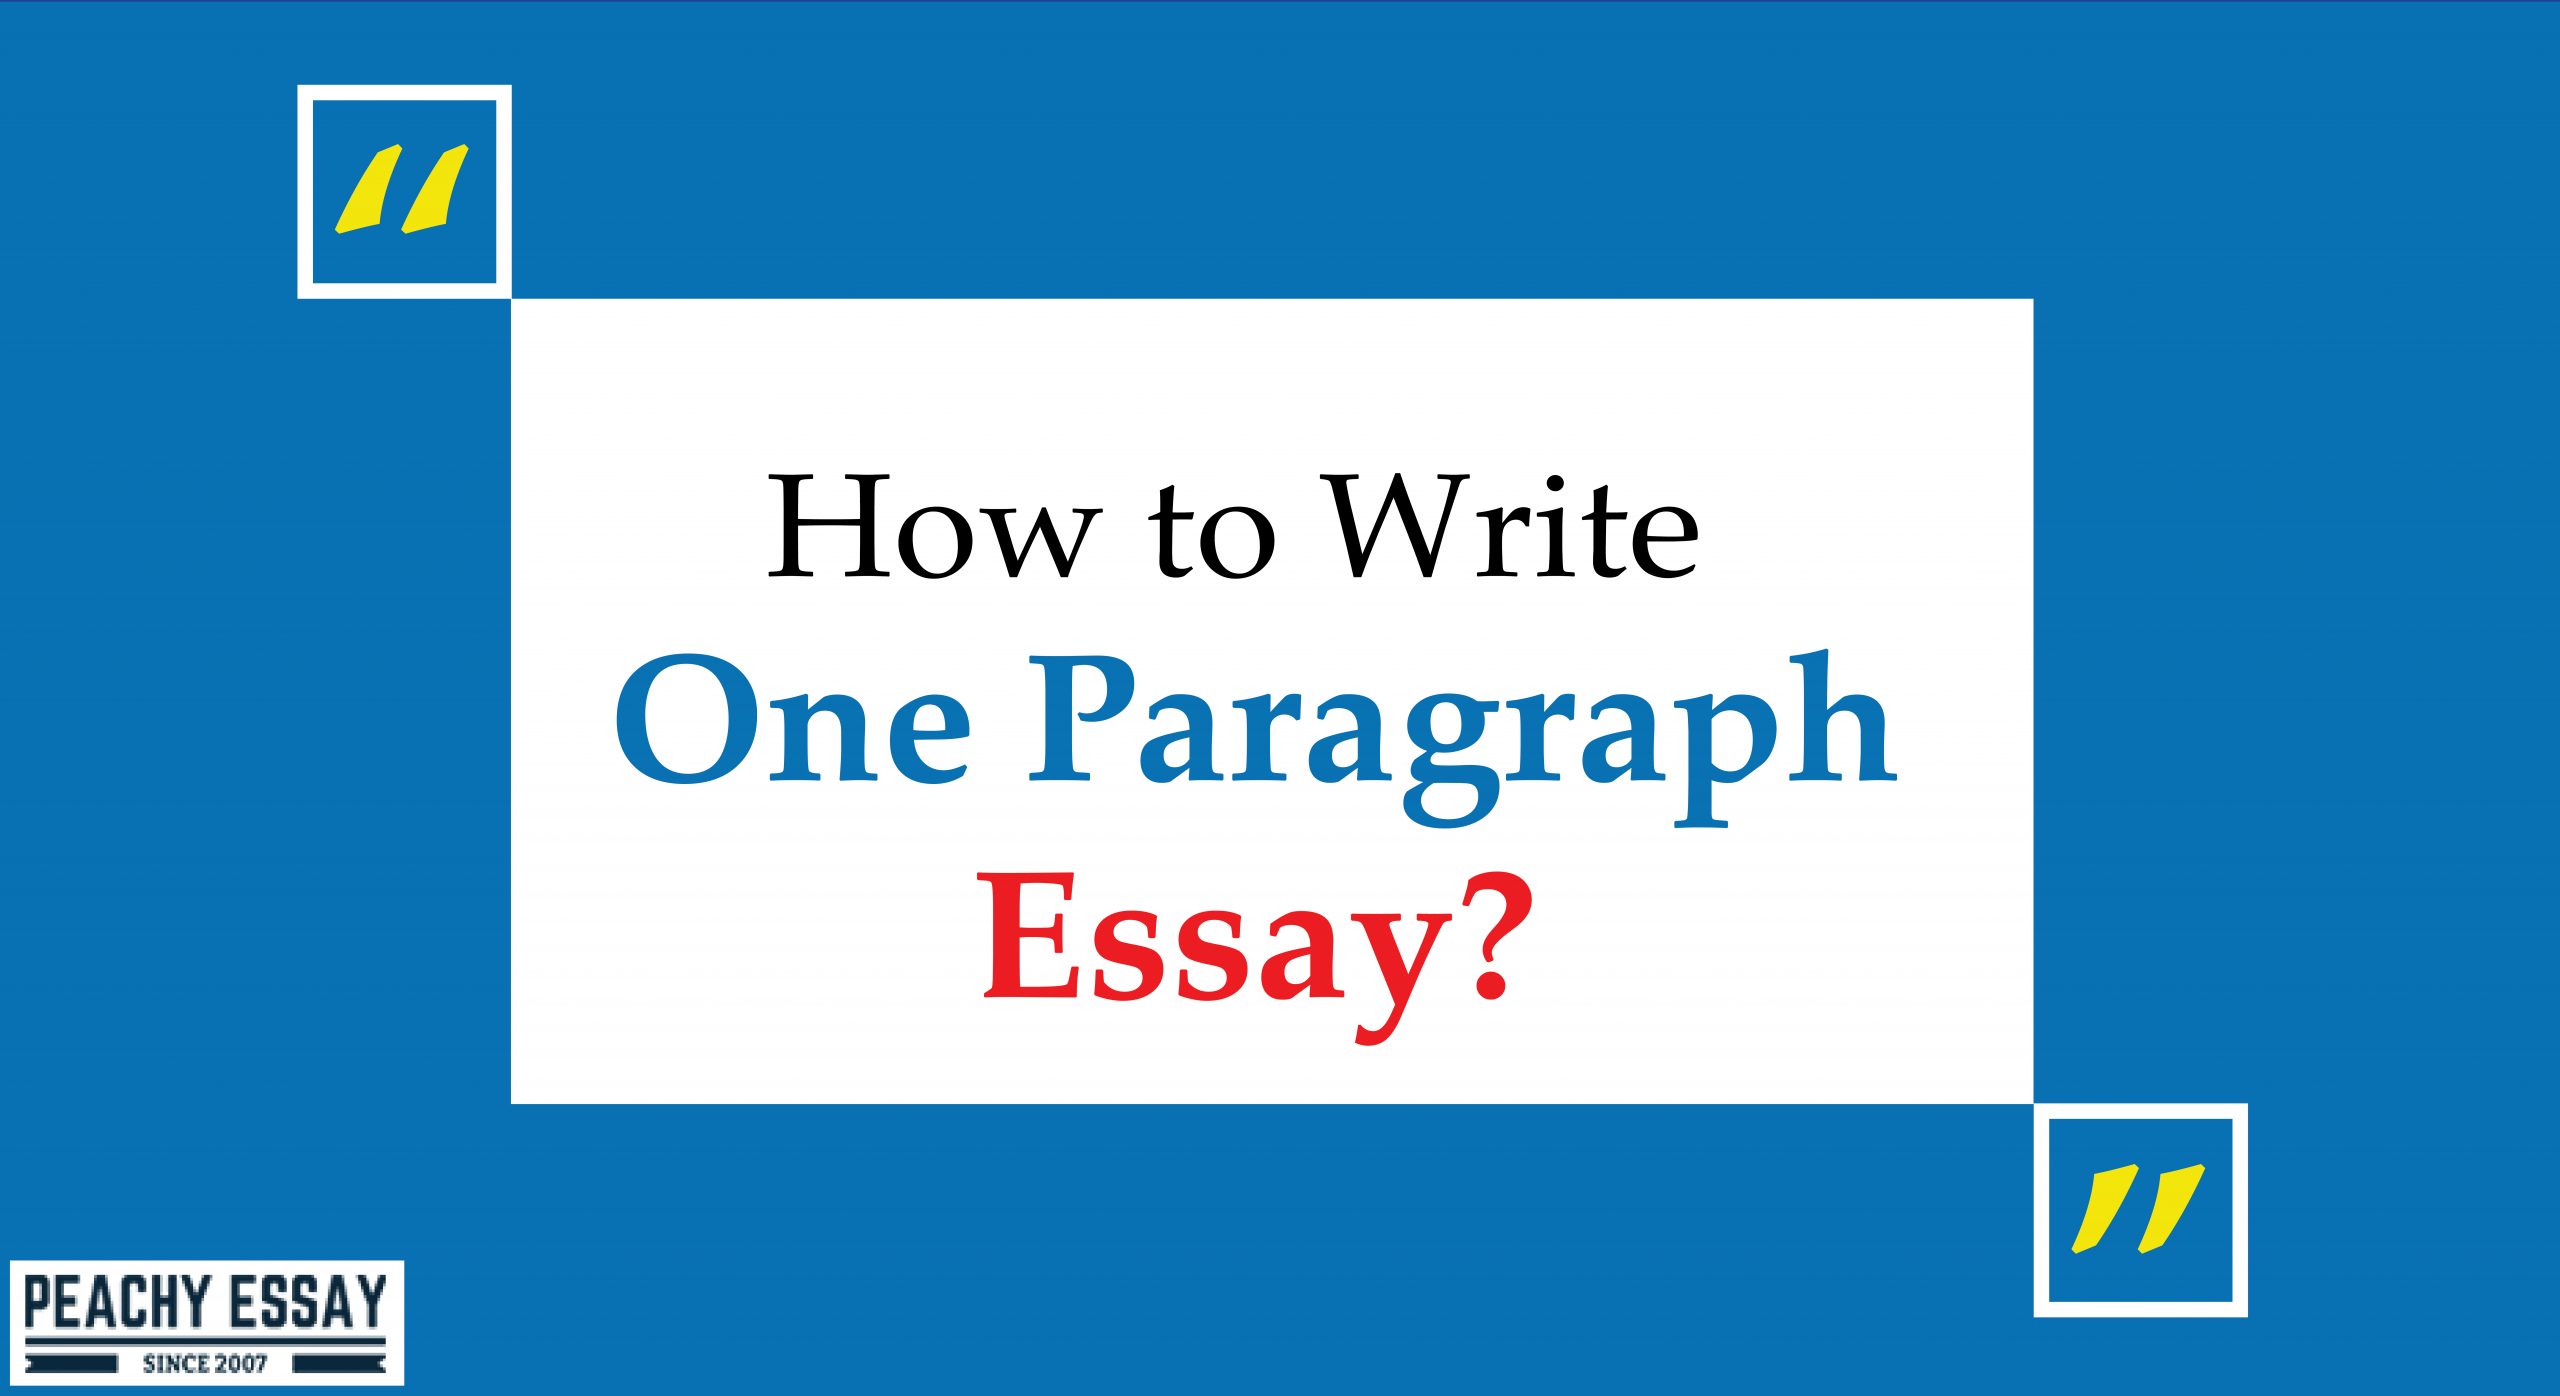 write one paragraph essay how your involvement and participation